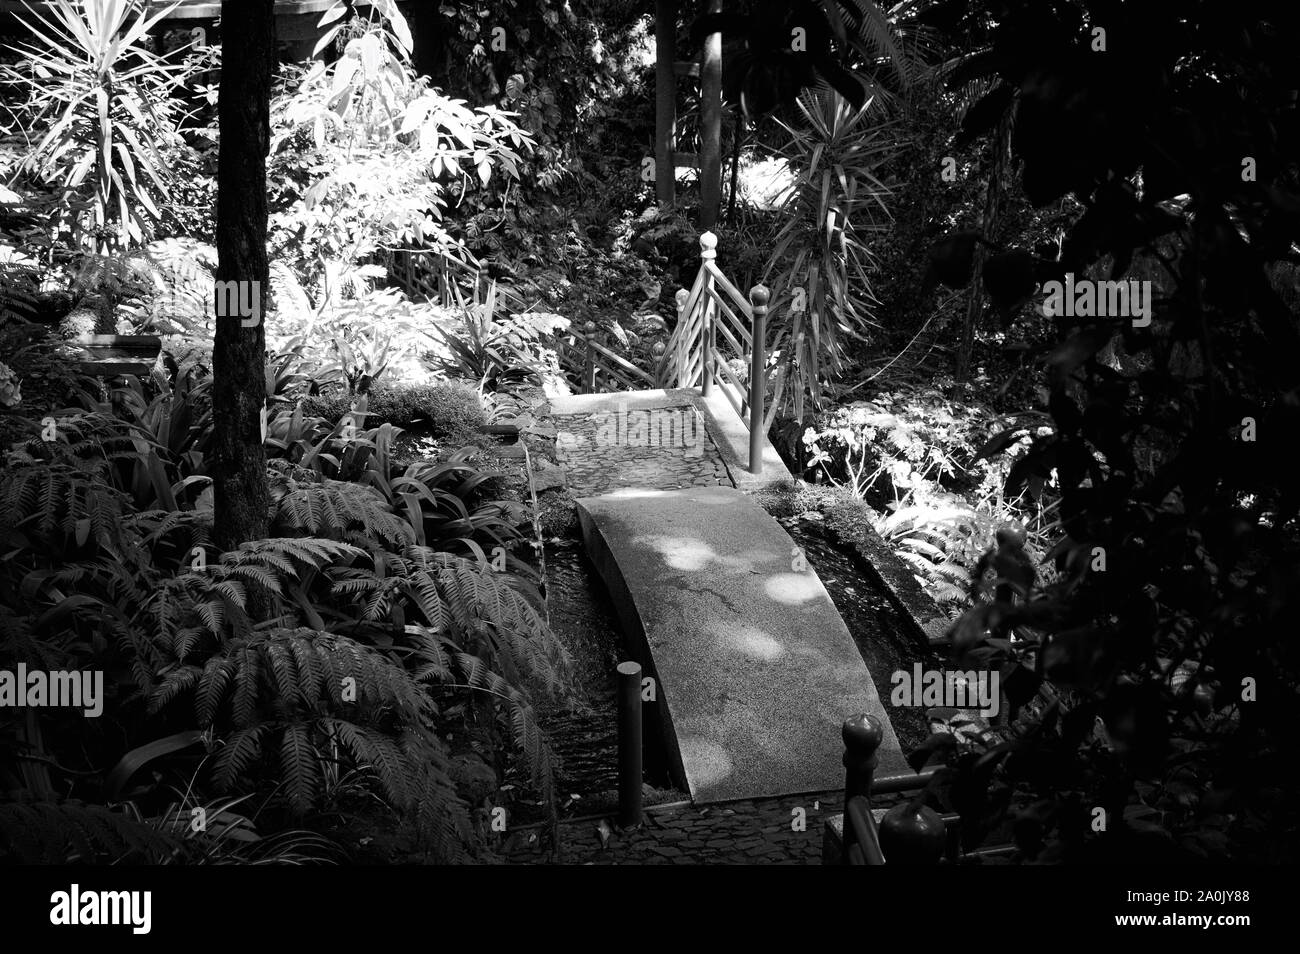 A bridge in a japanese garden in the forest (Funchal, Madeira, Portugal) Stock Photo